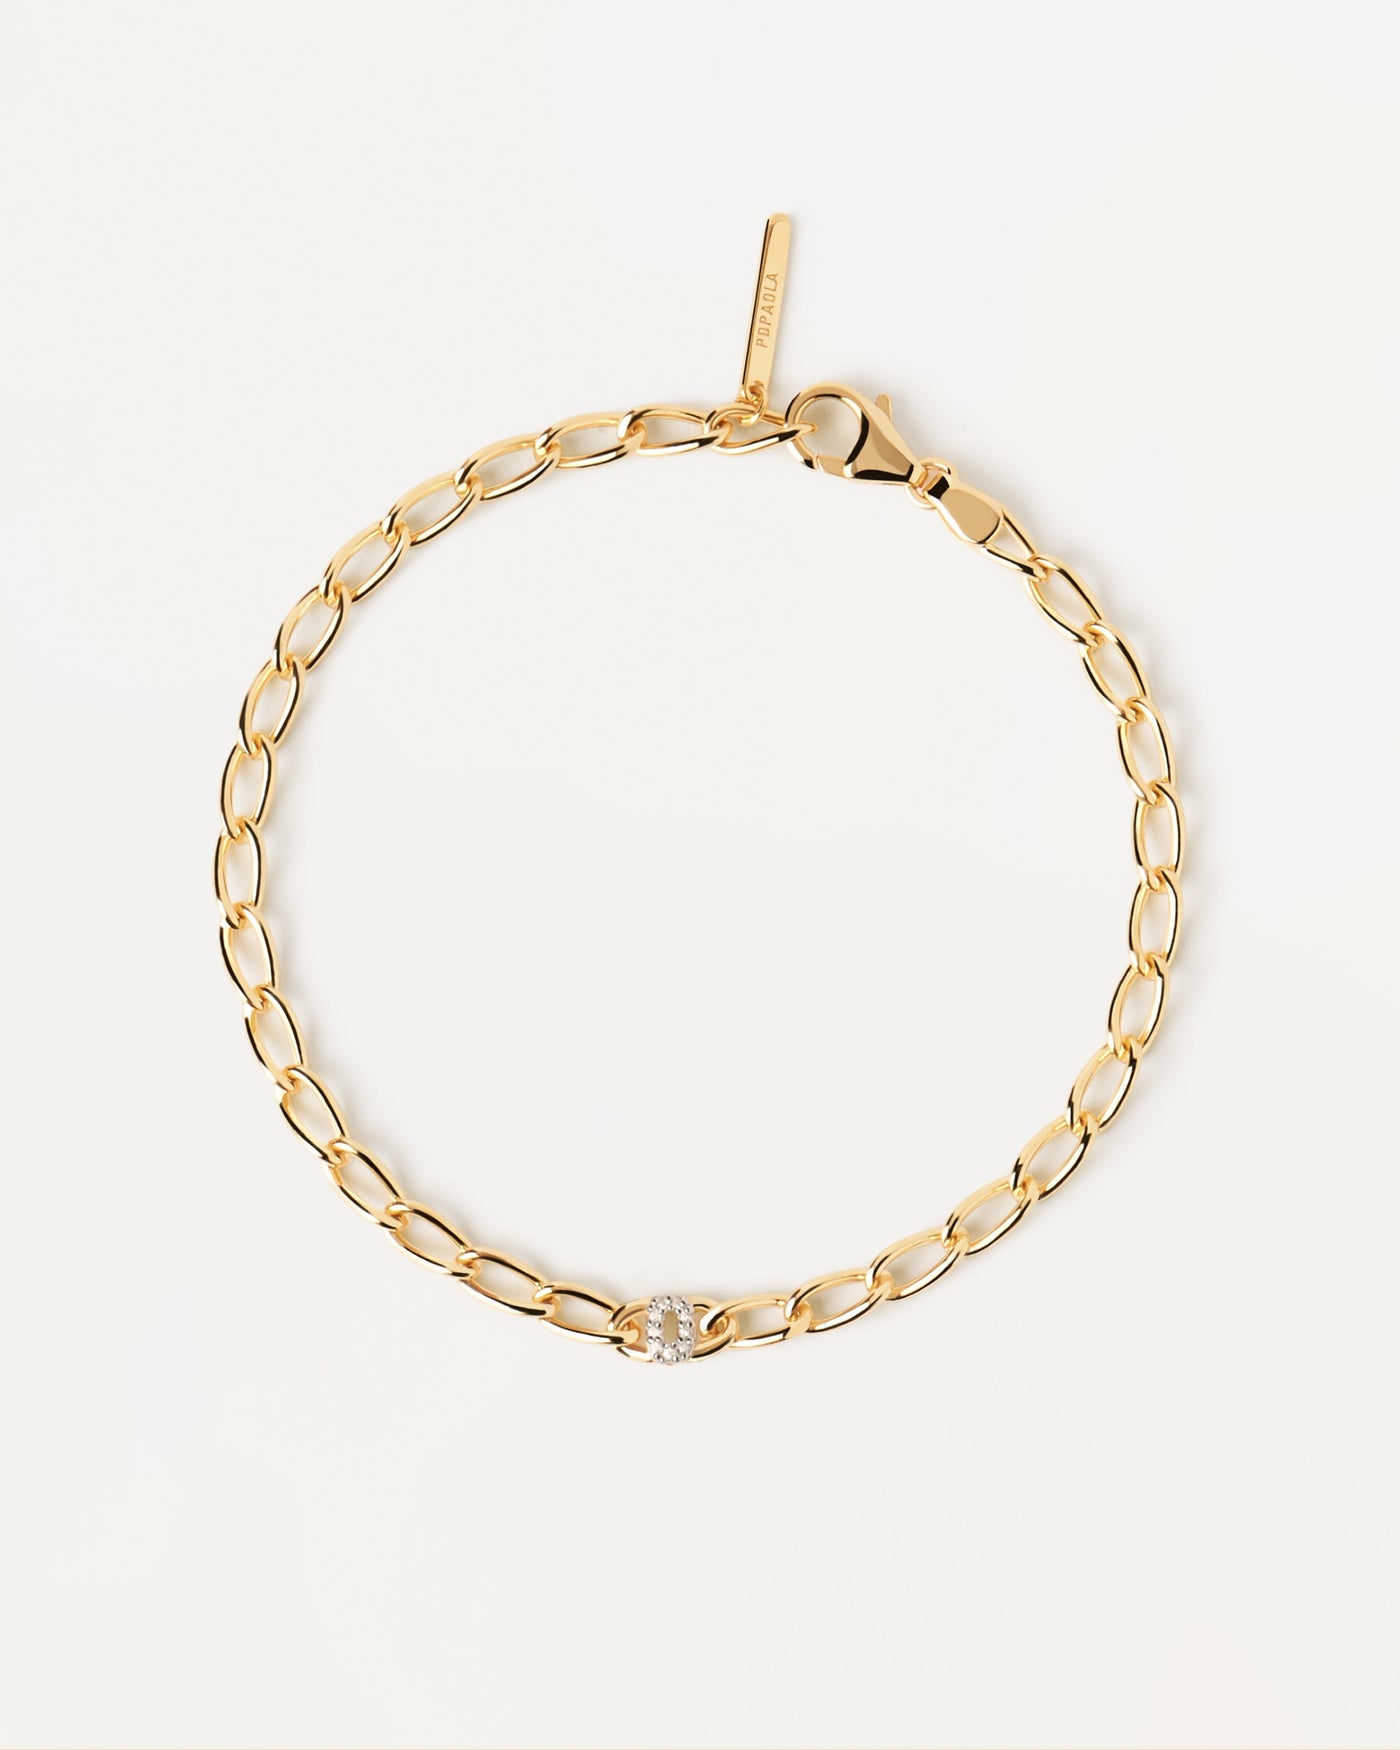 2023 Selection | Letter O Chain Bracelet. cable chain bracelet in gold-plated silver with initial O in zirconia. Get the latest arrival from PDPAOLA. Place your order safely and get this Best Seller. Free Shipping.